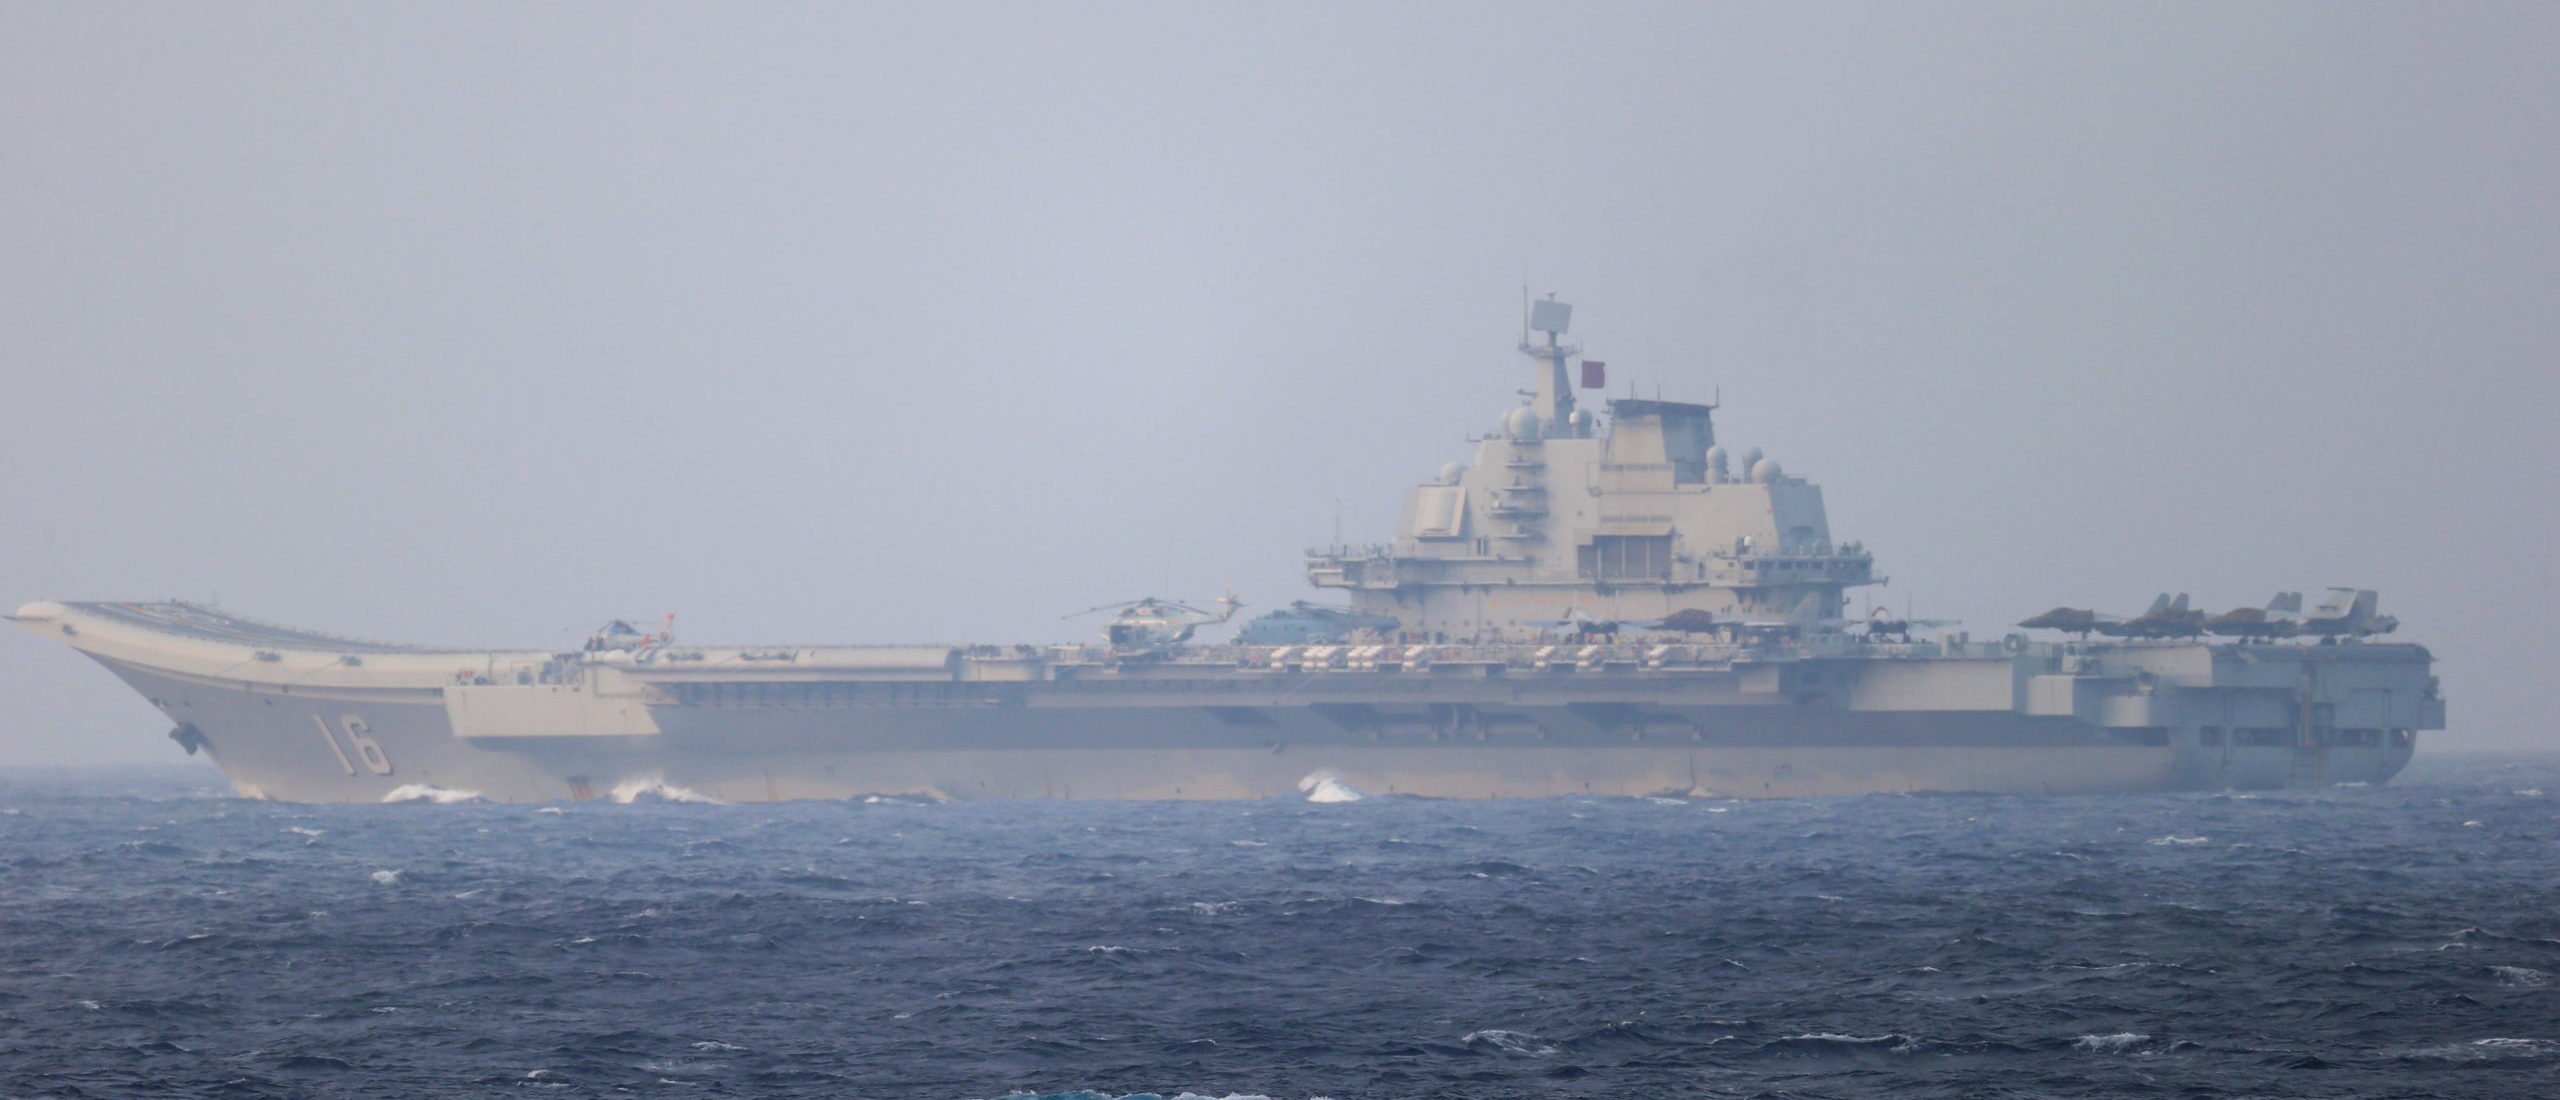 Chinese aircraft carrier Liaoning sails through the Miyako Strait near Okinawa on its way to the Pacific in this handout photo taken by Japan Self-Defense Forces and released by the Joint Staff Office of the Defense Ministry of Japan on April 4, 2021. (REUTERS/U.S. Navy)